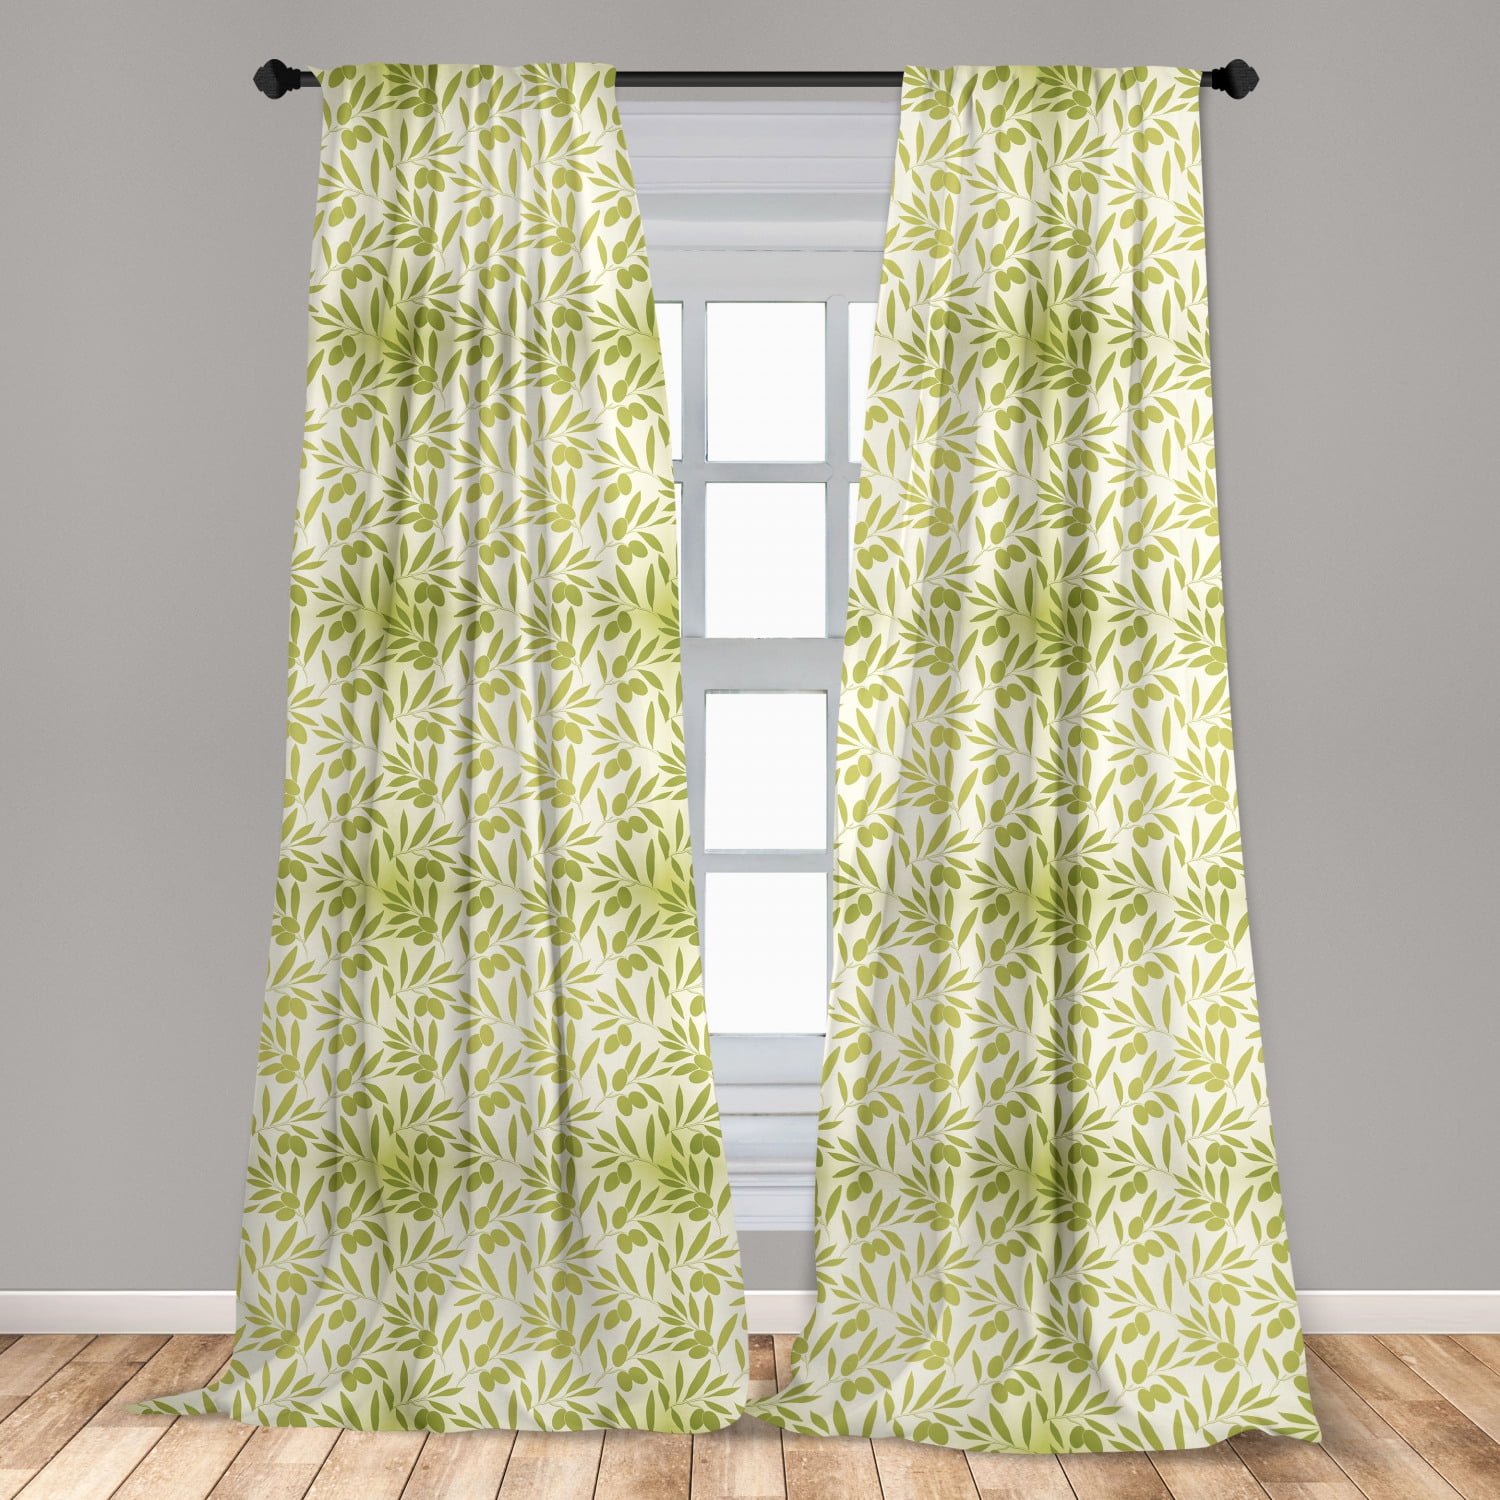 Kitchen Curtains Tea Time Cups Flowers Window Drapes 2 Panel Set 108x63 Inches 